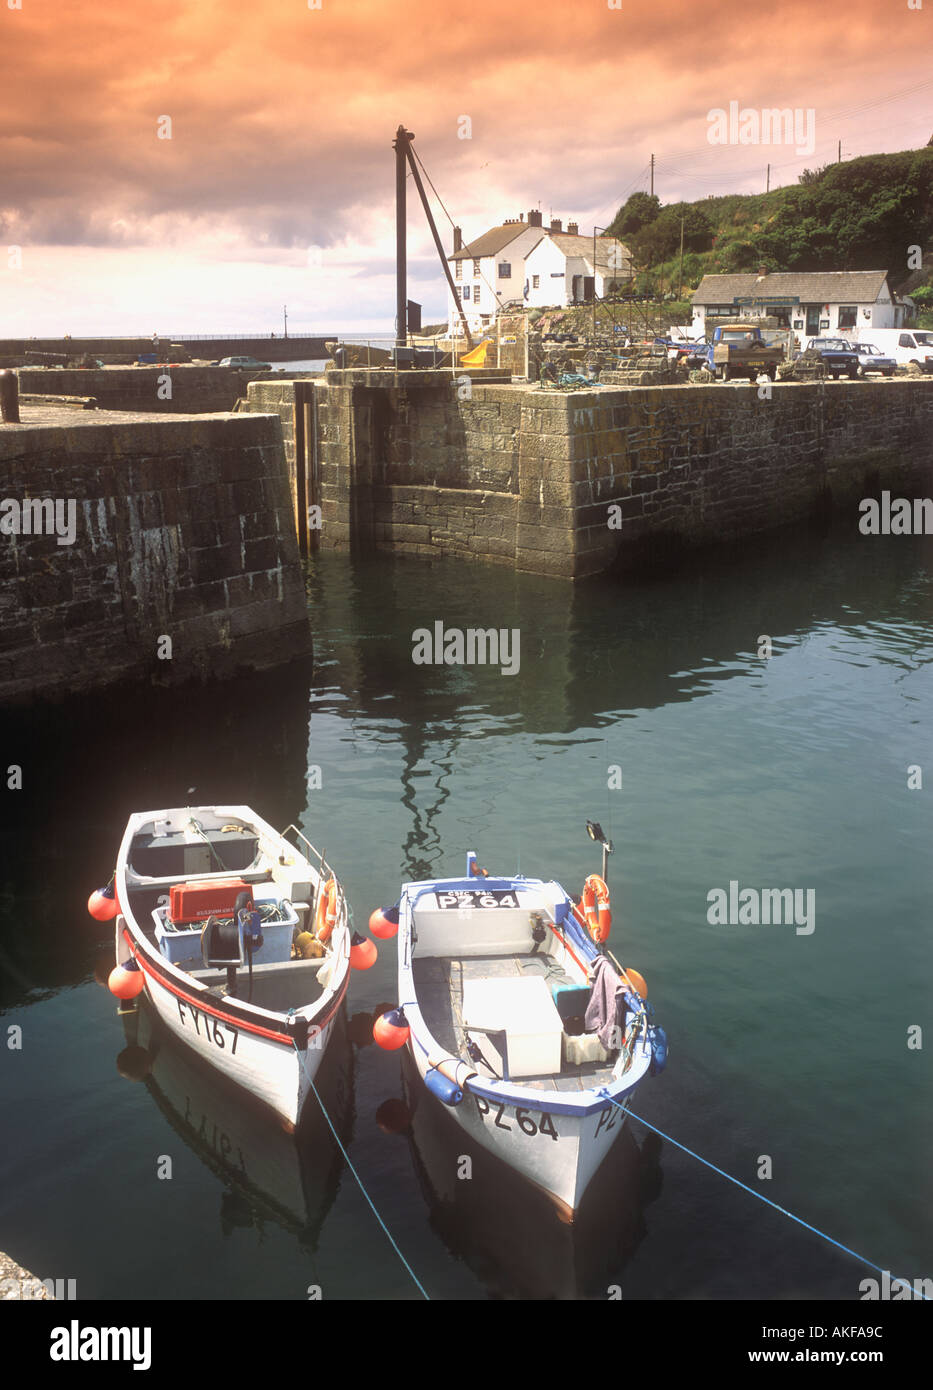 Harbour view and boats in the fishing village of Porthleven on the south coast of Cornwall in the UK Stock Photo